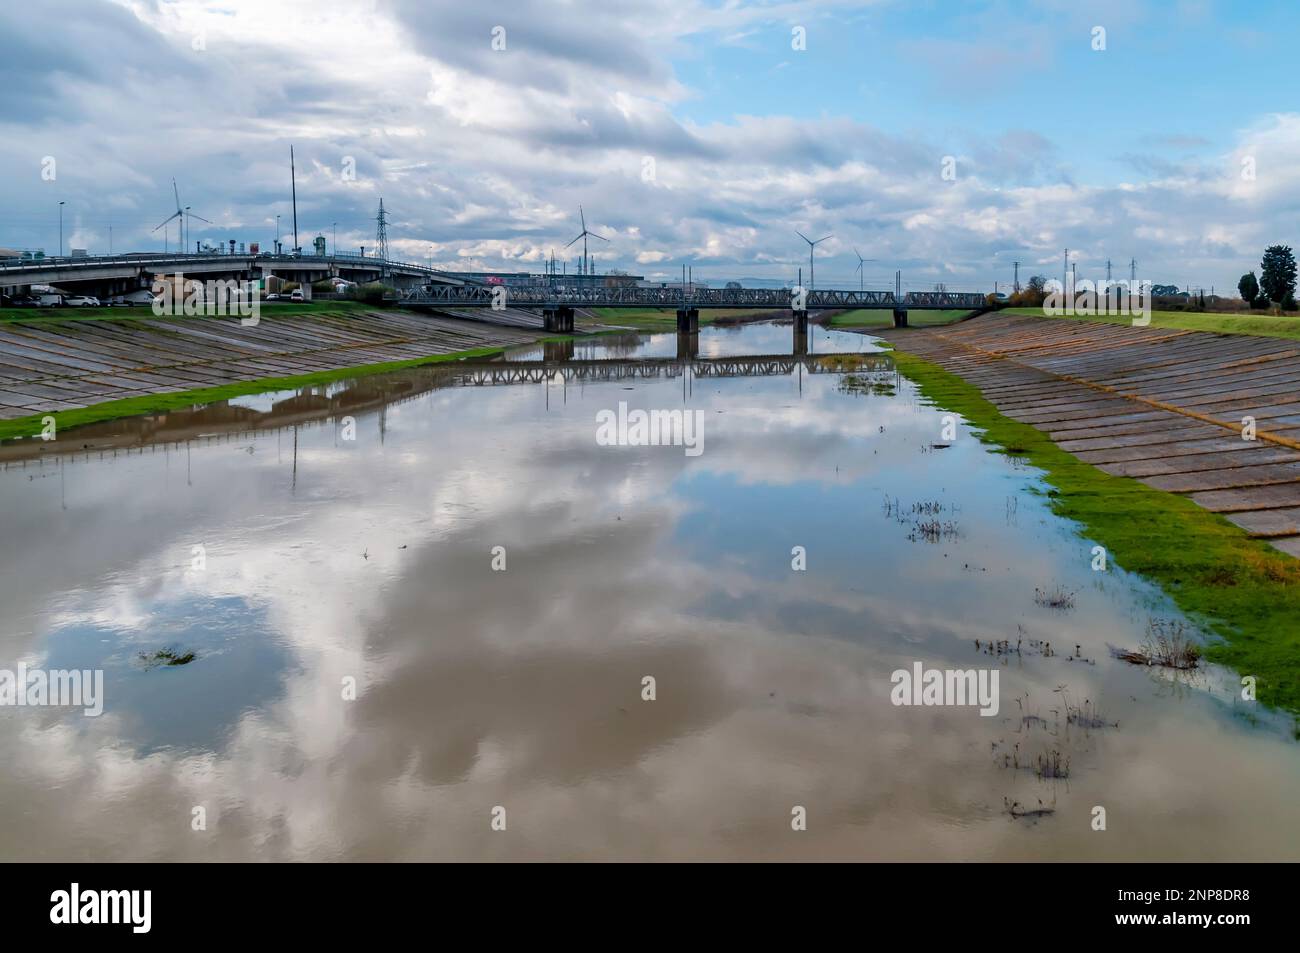 The industrial area and the railway are reflected in the water of the spillway in Pontedera, Pisa, Italy Stock Photo